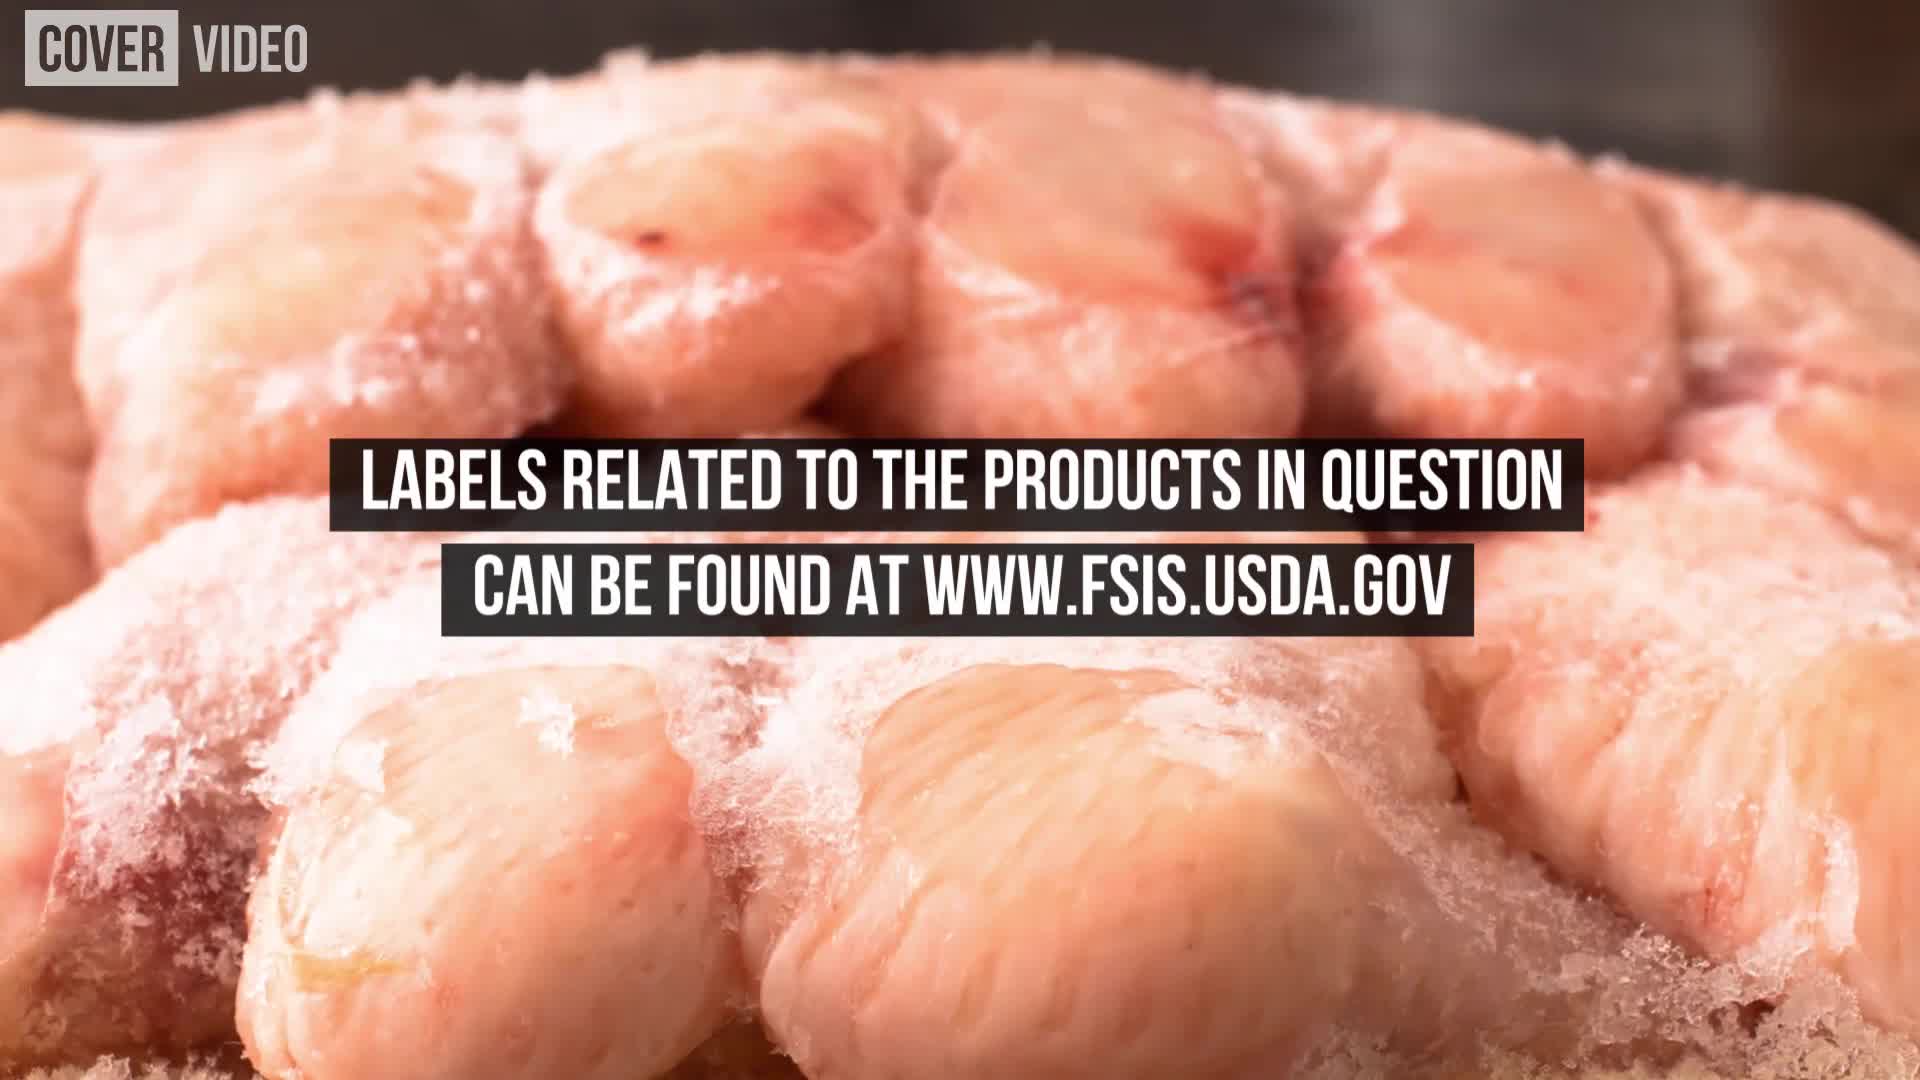 Metal contamination leads to massive US chicken recall